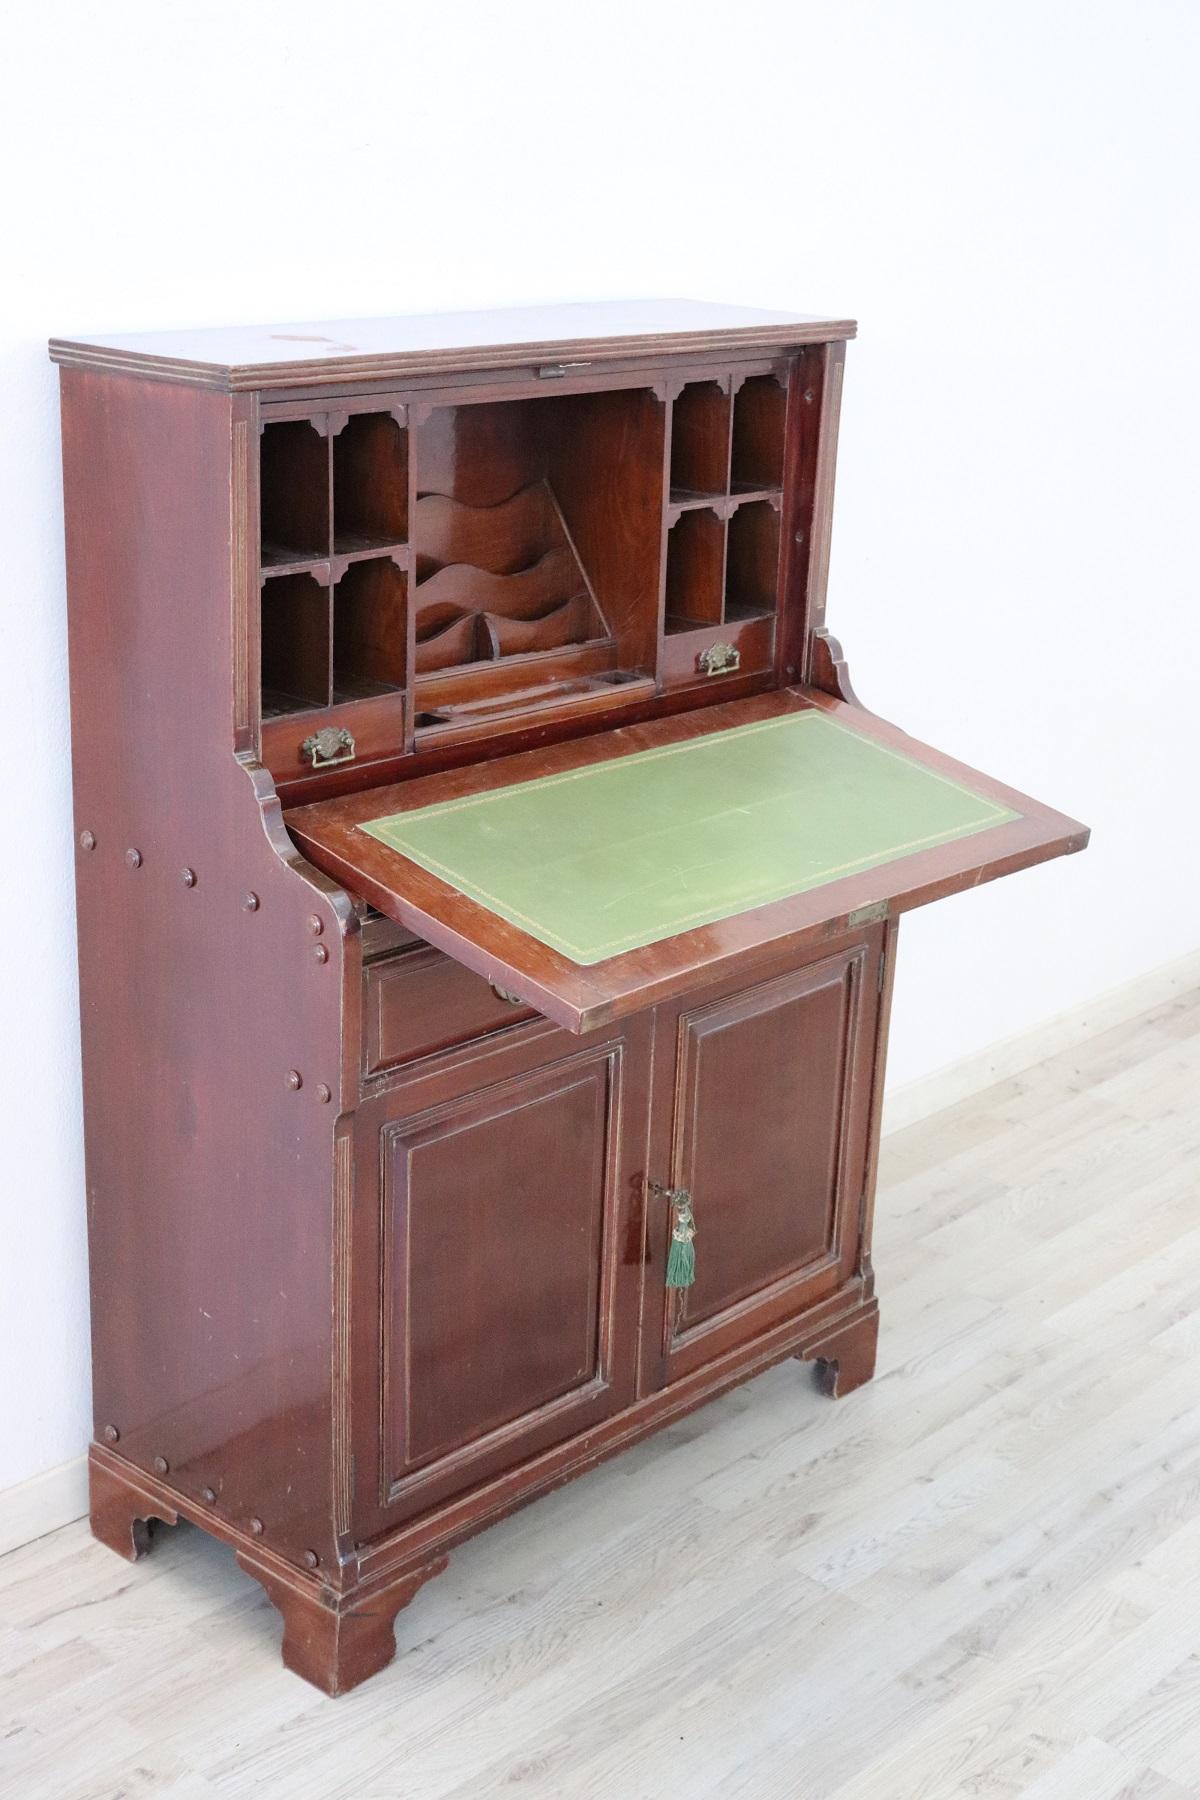 Elegant secretaire in walnut wood. Very simple and ideal linera in any environment. The plan opens up and becomes a comfortable plan for writing. Internally, many small compartments and a central letter holder.
The antique secretaire have been used